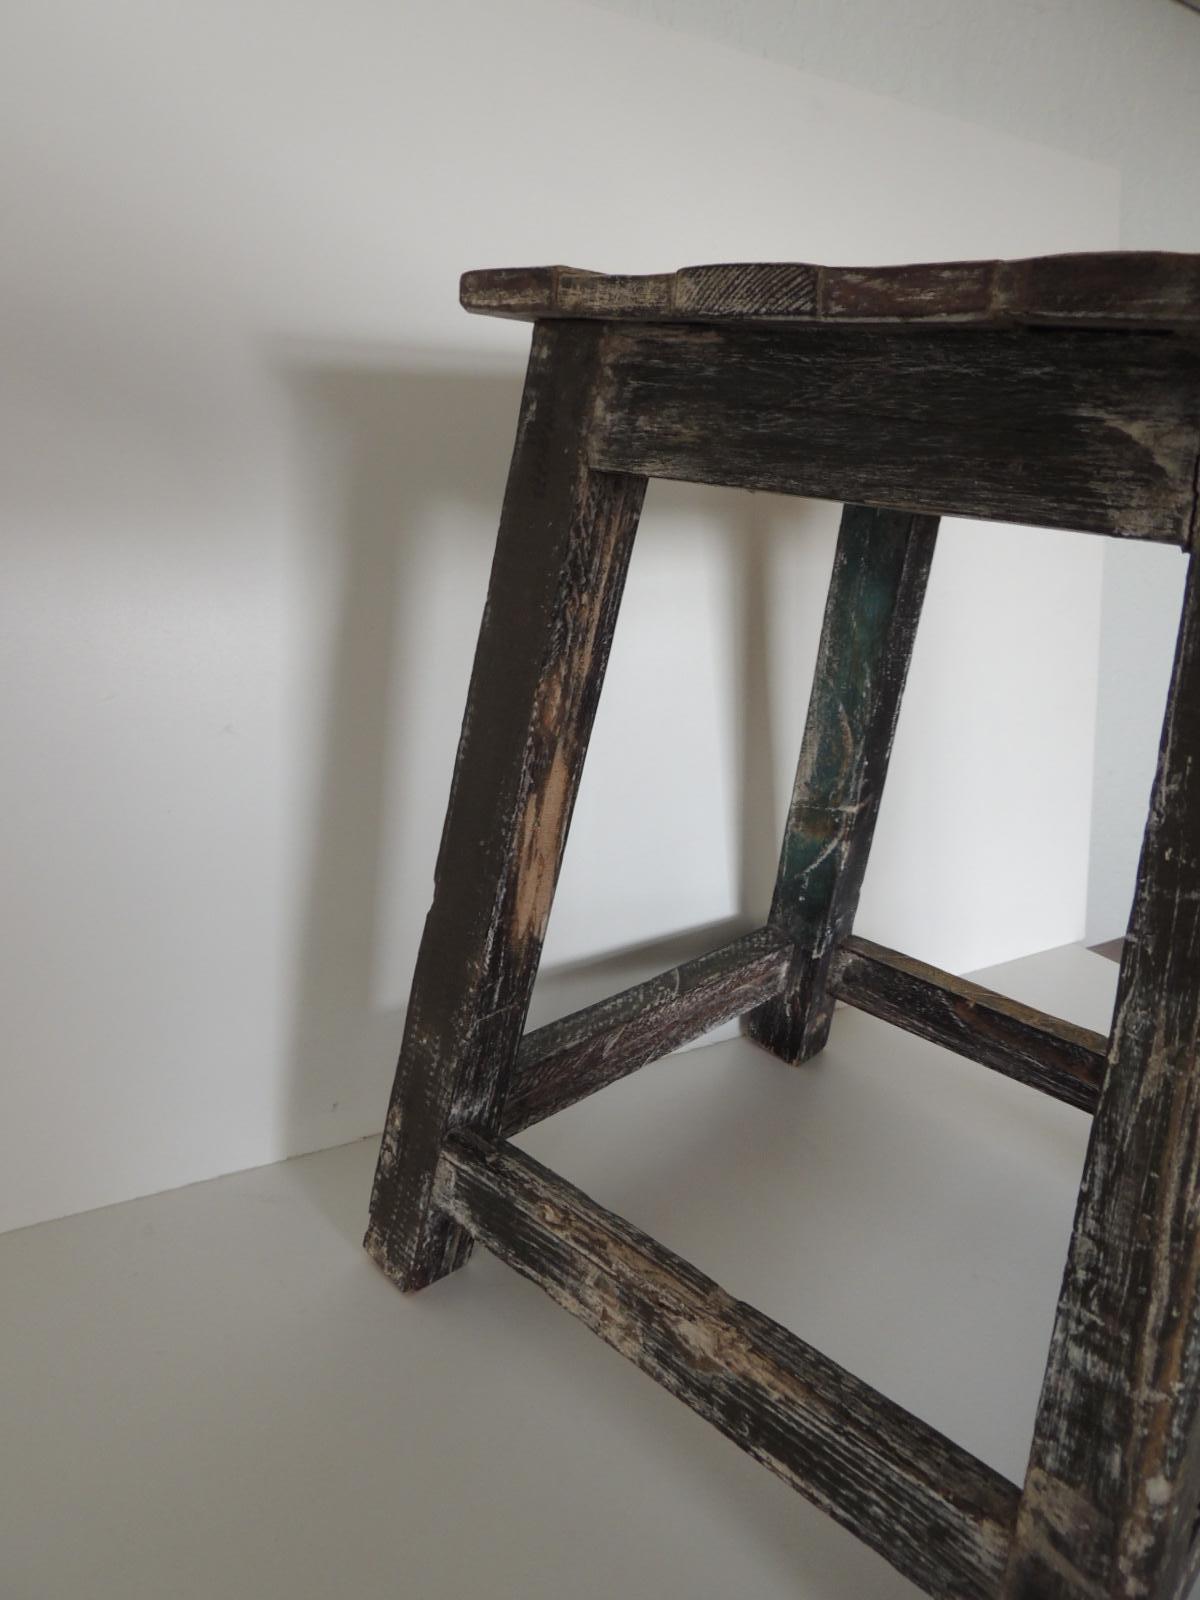 Asian reclaimed wood square stand.
Ideal as a side table or stool.
Size: 12